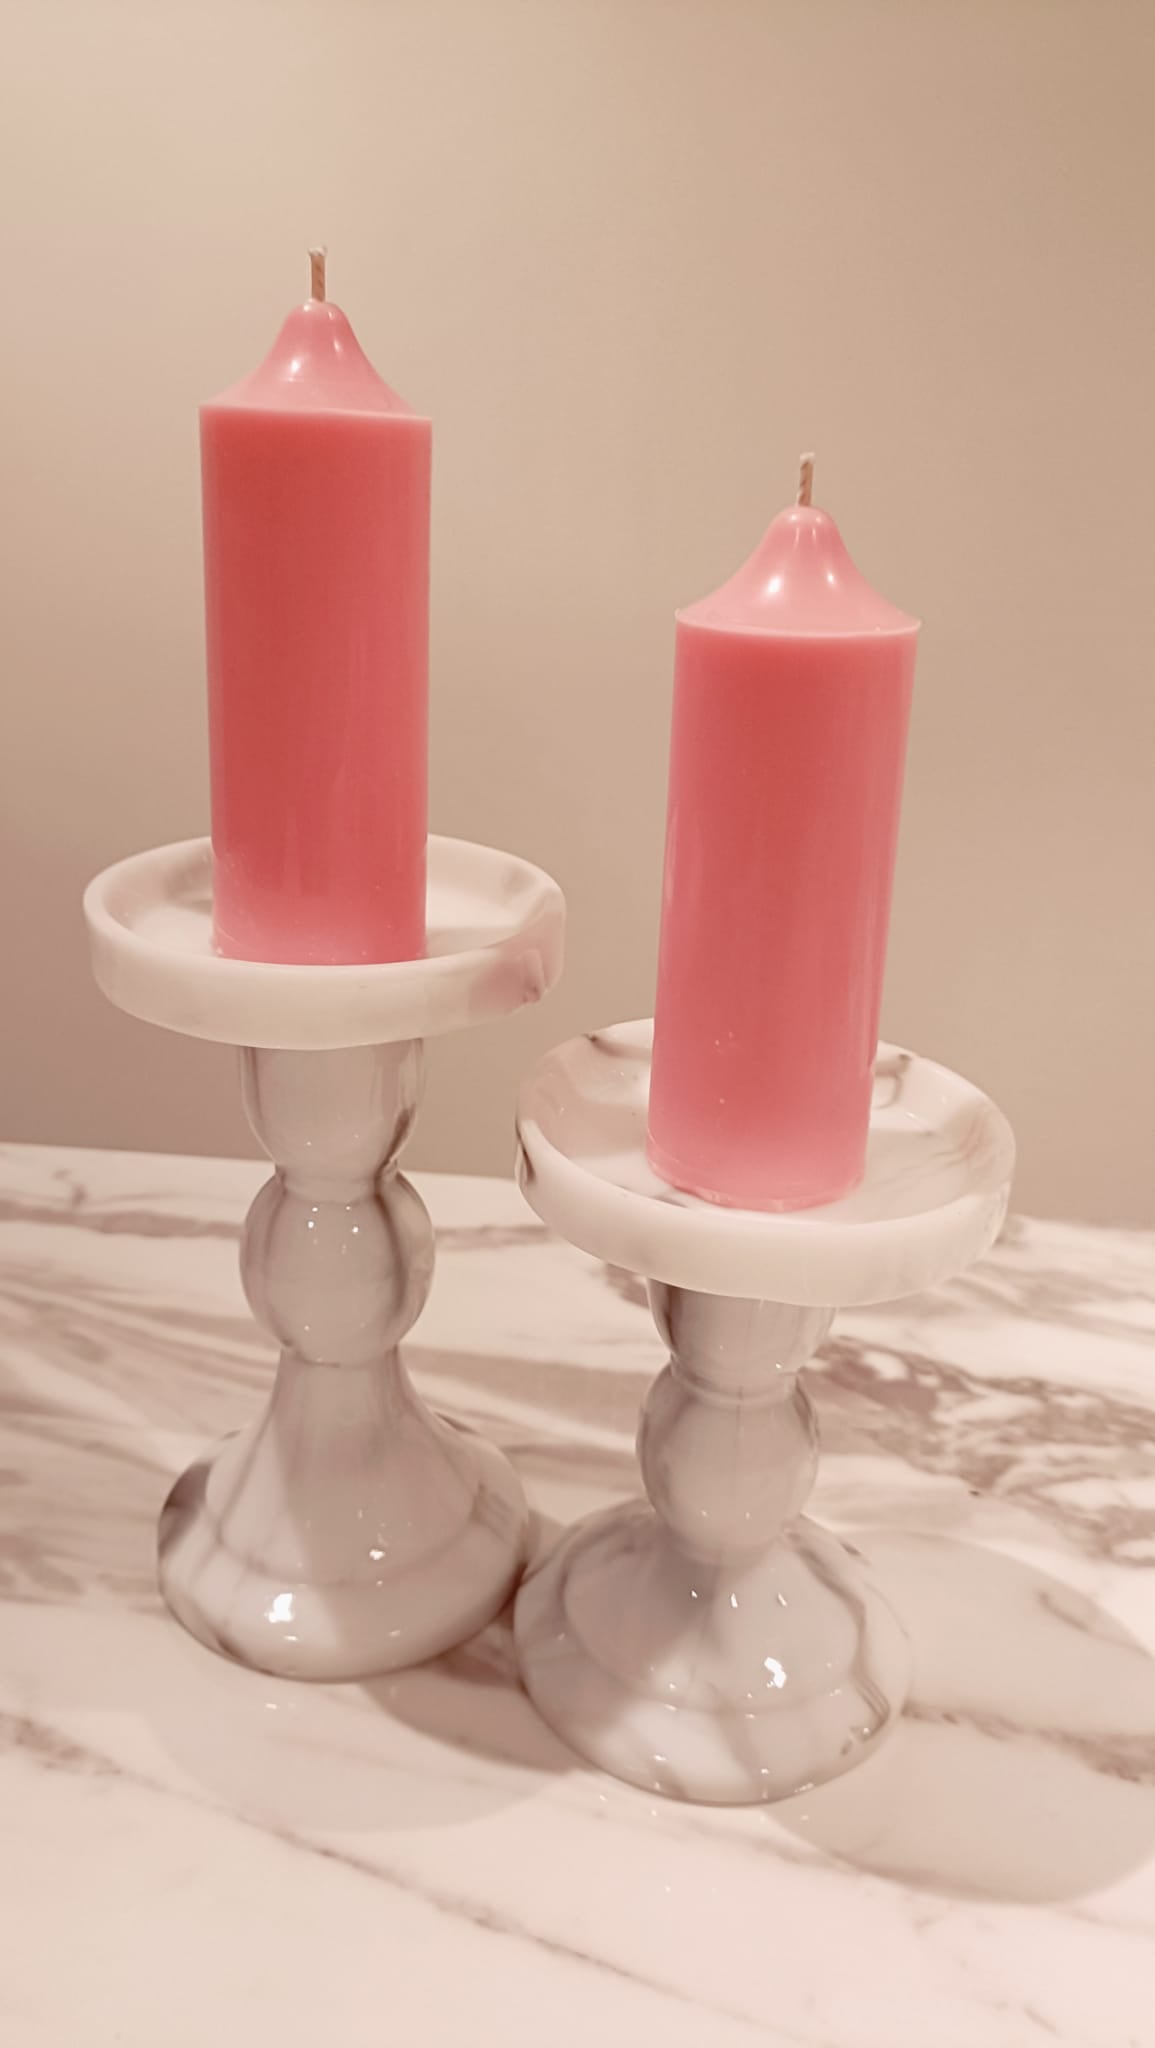 Pink Soy Wax Pillar Candles - Unscented, Set of 2 (Various Sizes)